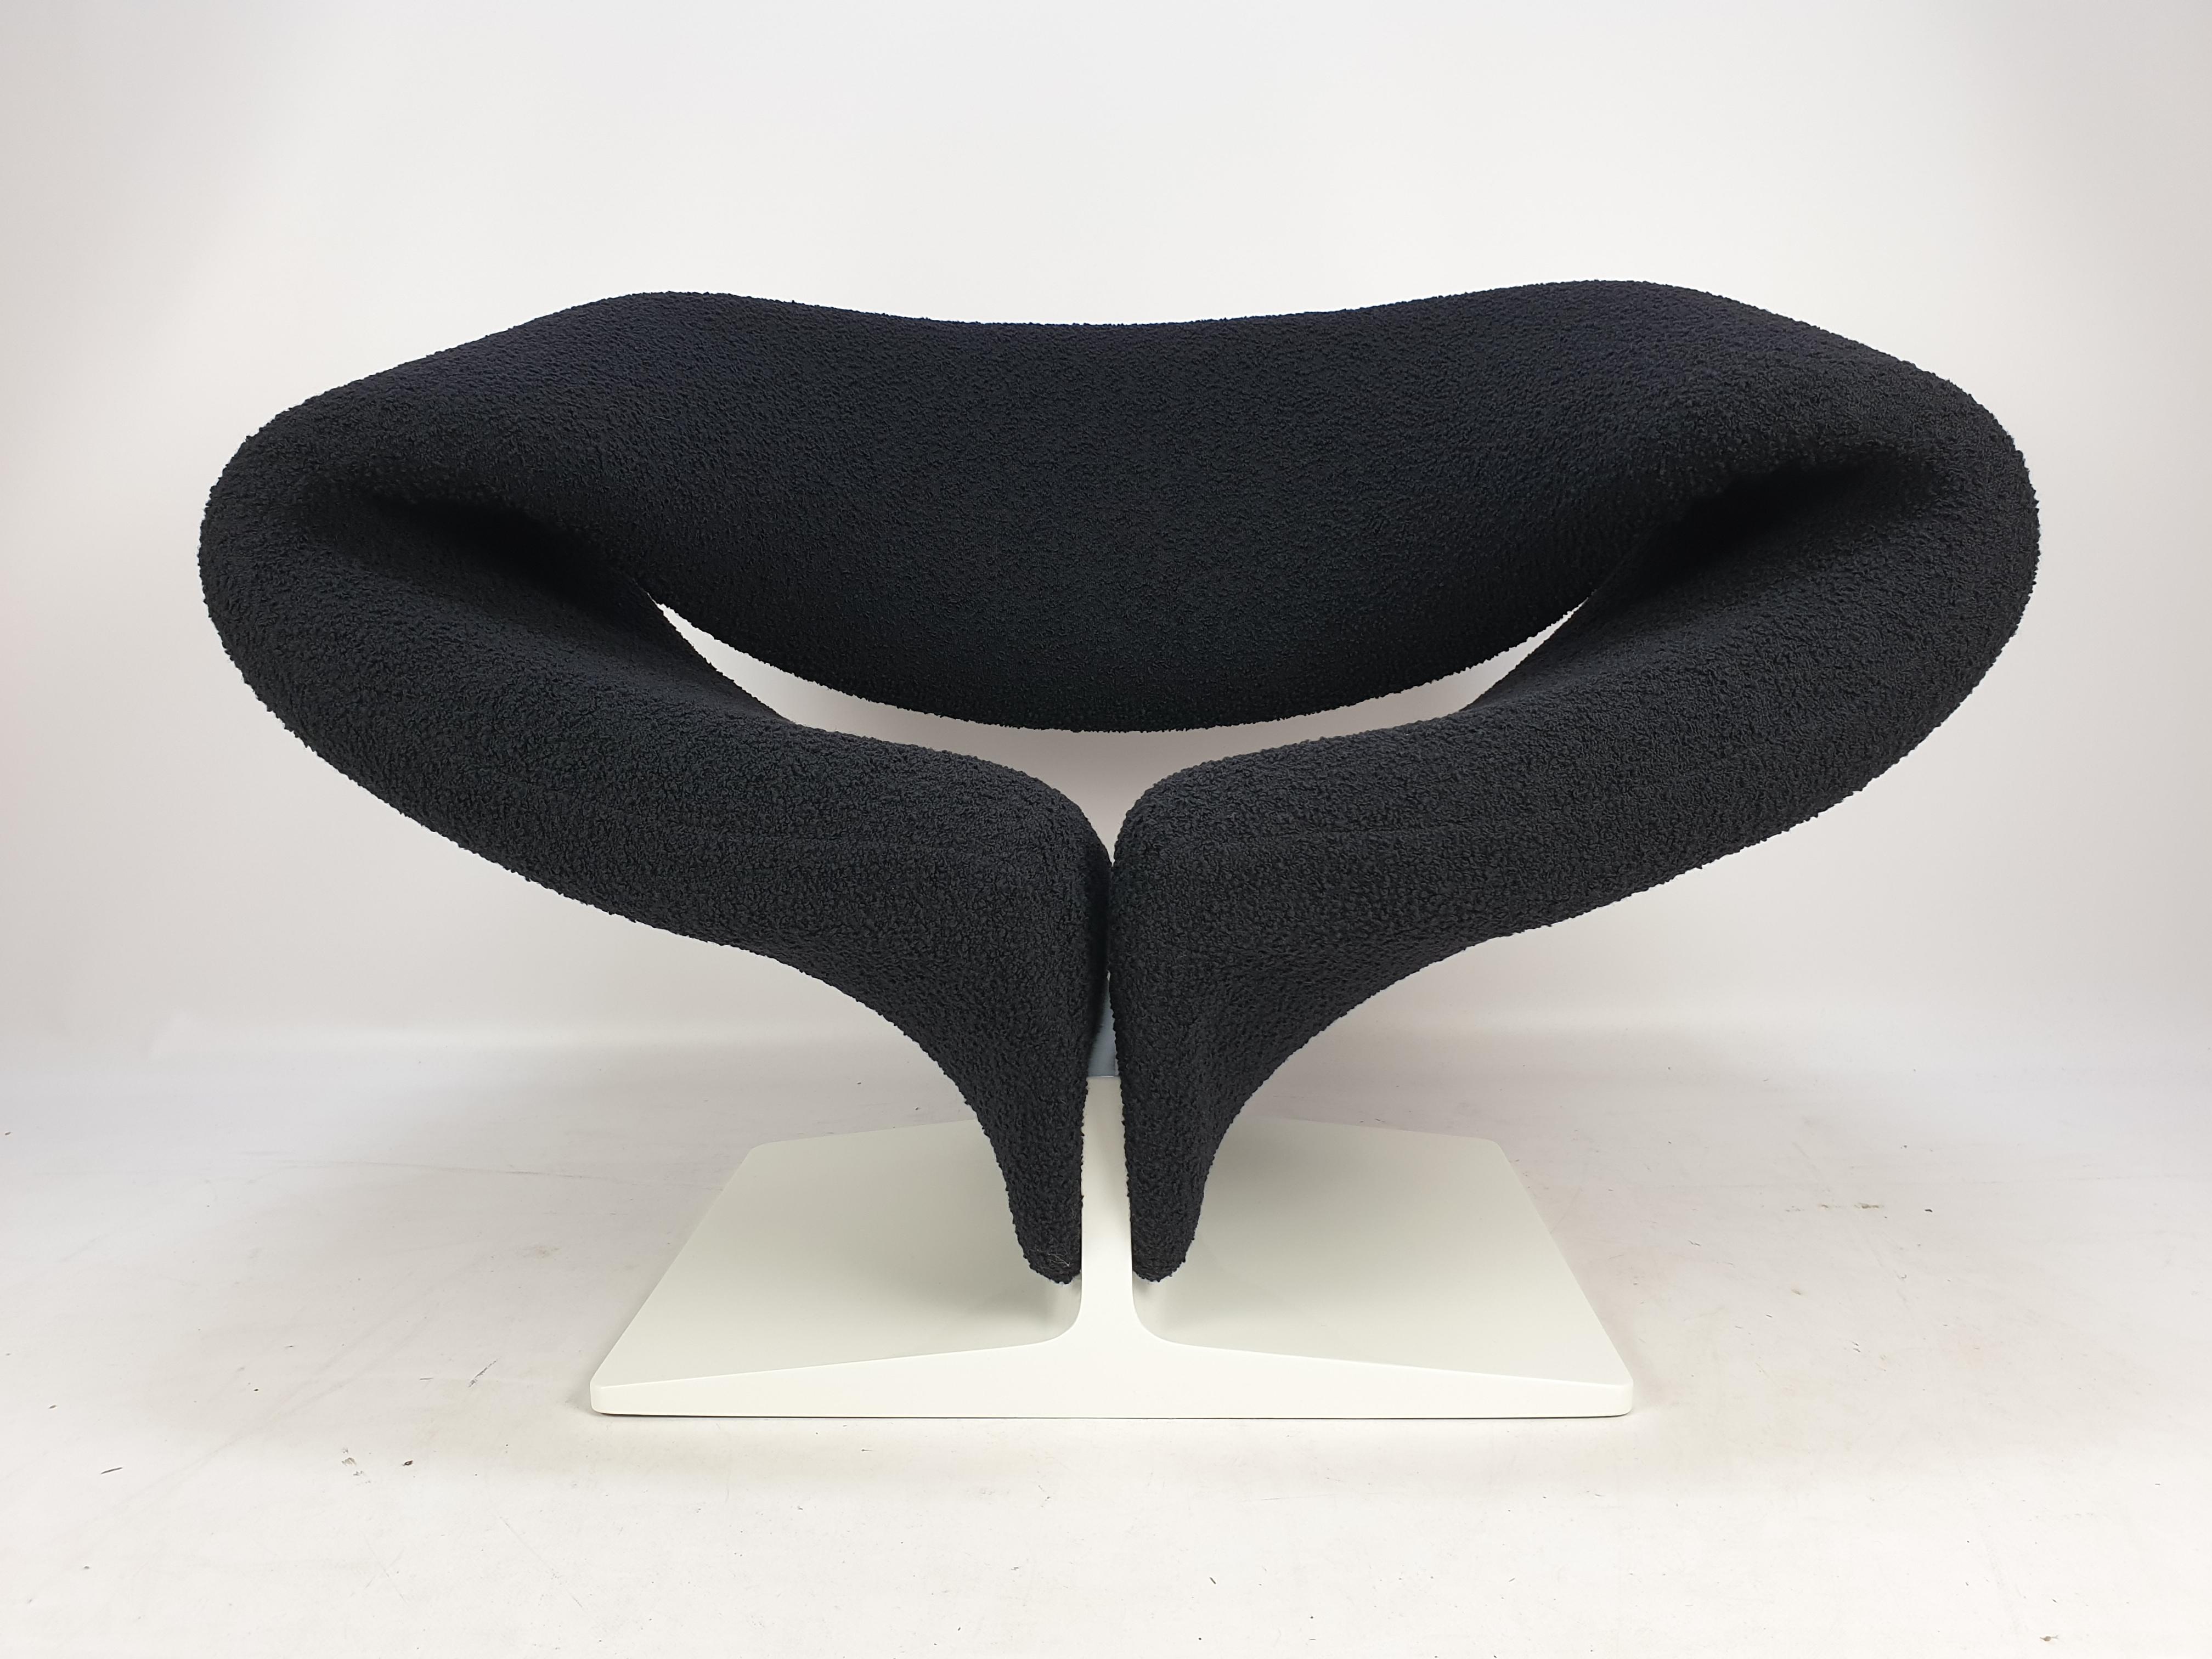 Stunning ribbon chair, designed by the French designer Pierre Paulin in the 60's. It is produced by Artifort. The chair is amazingly comfortable. It is completely restored with new fabric and new foam. The wonderful black bouclé wool fabric is